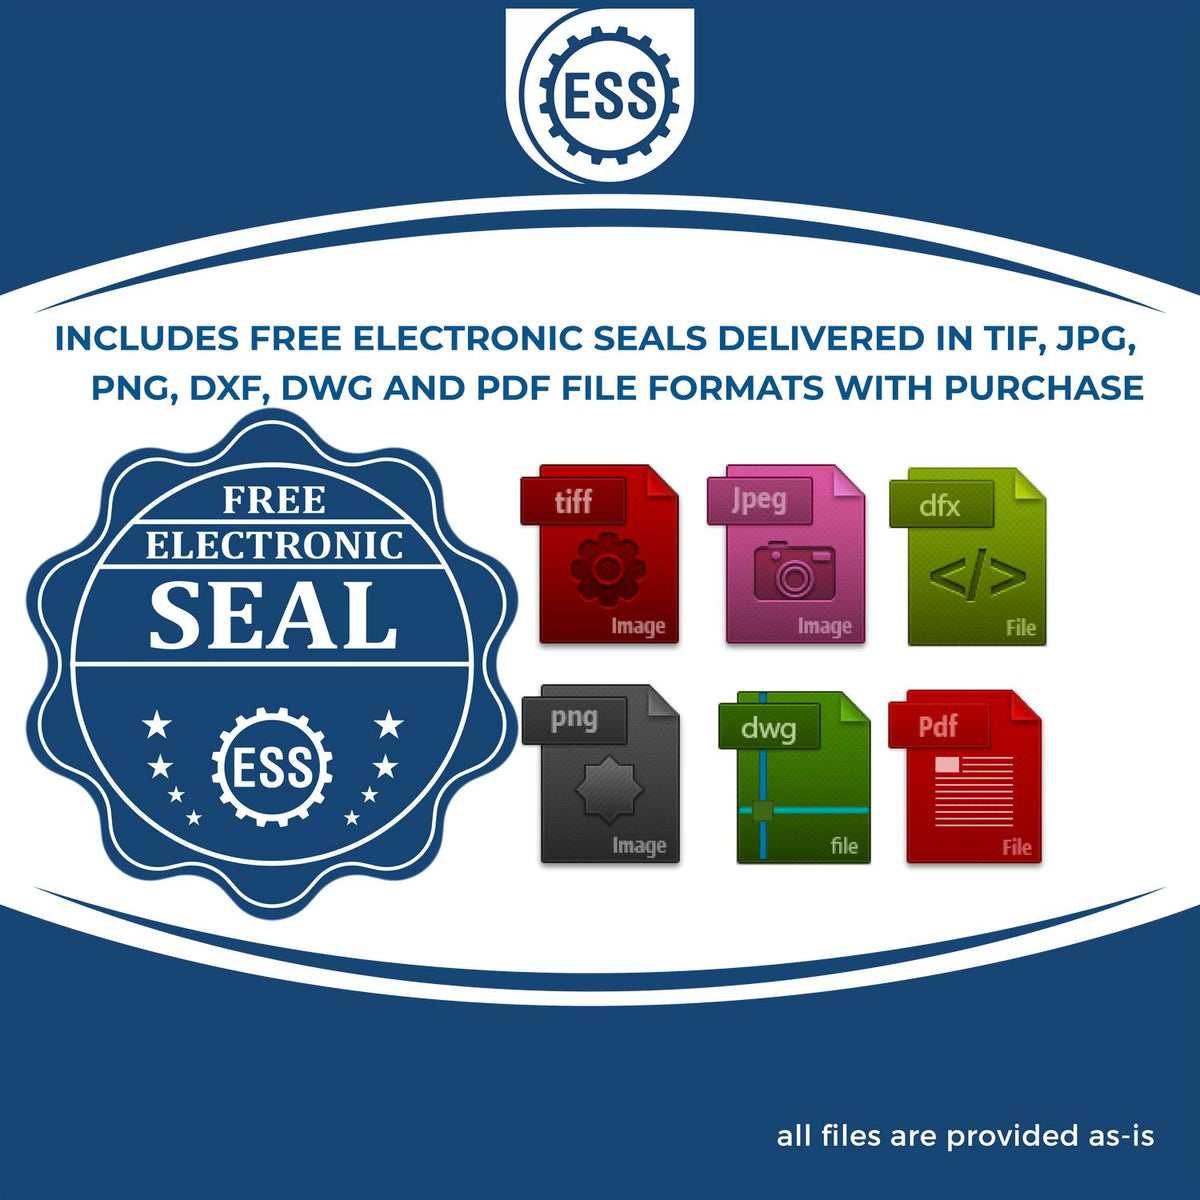 An infographic for the free electronic seal for the PSI Utah Notary Stamp illustrating the different file type icons such as DXF, DWG, TIF, JPG and PNG.